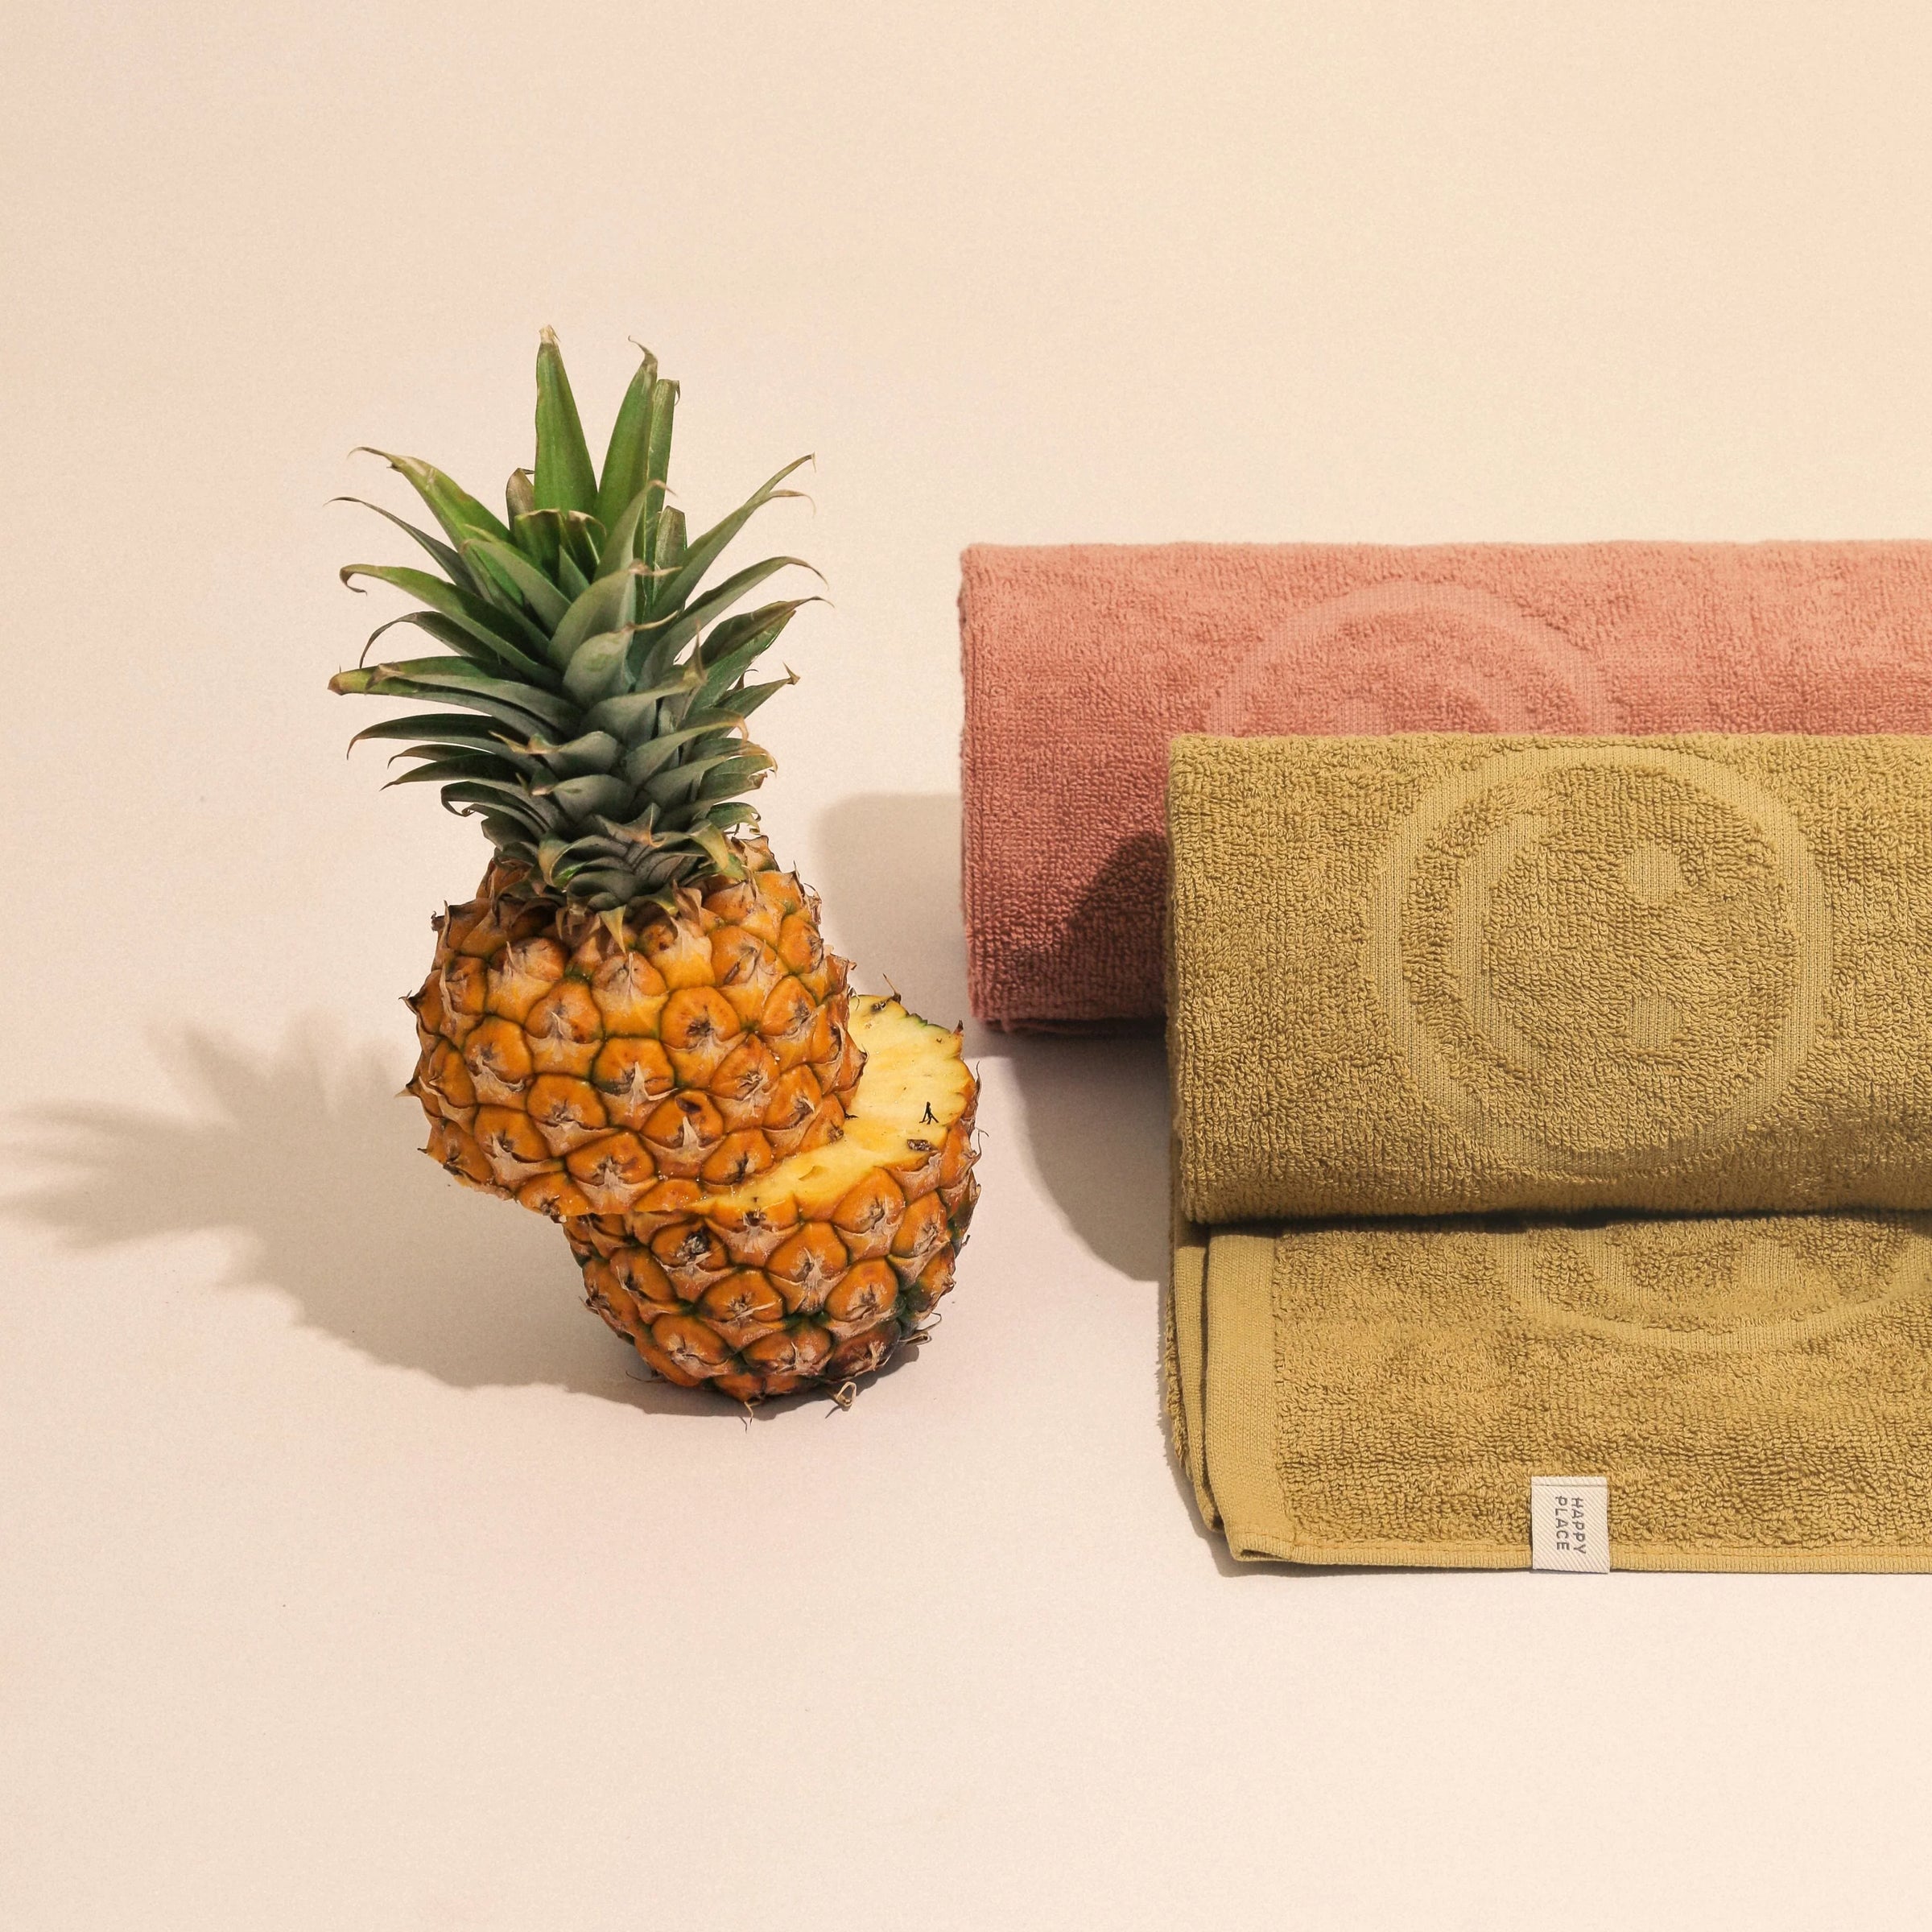 A pink and a green rolled up Happy place towel by a pineapple.